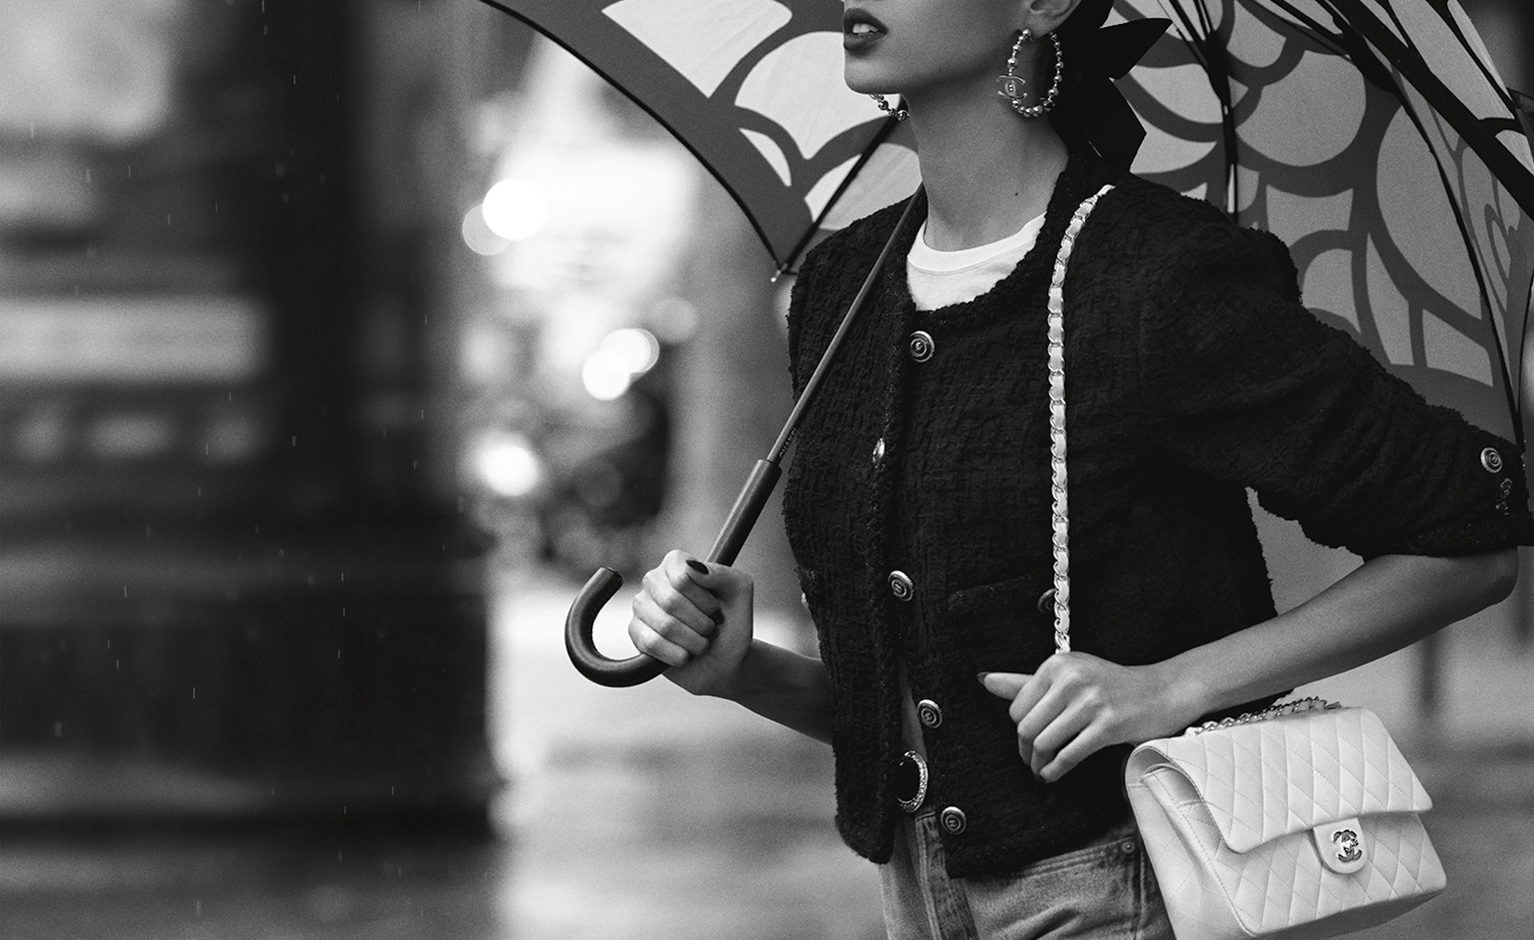 CHANEL Iconic Bag: here all the details about the new campaign